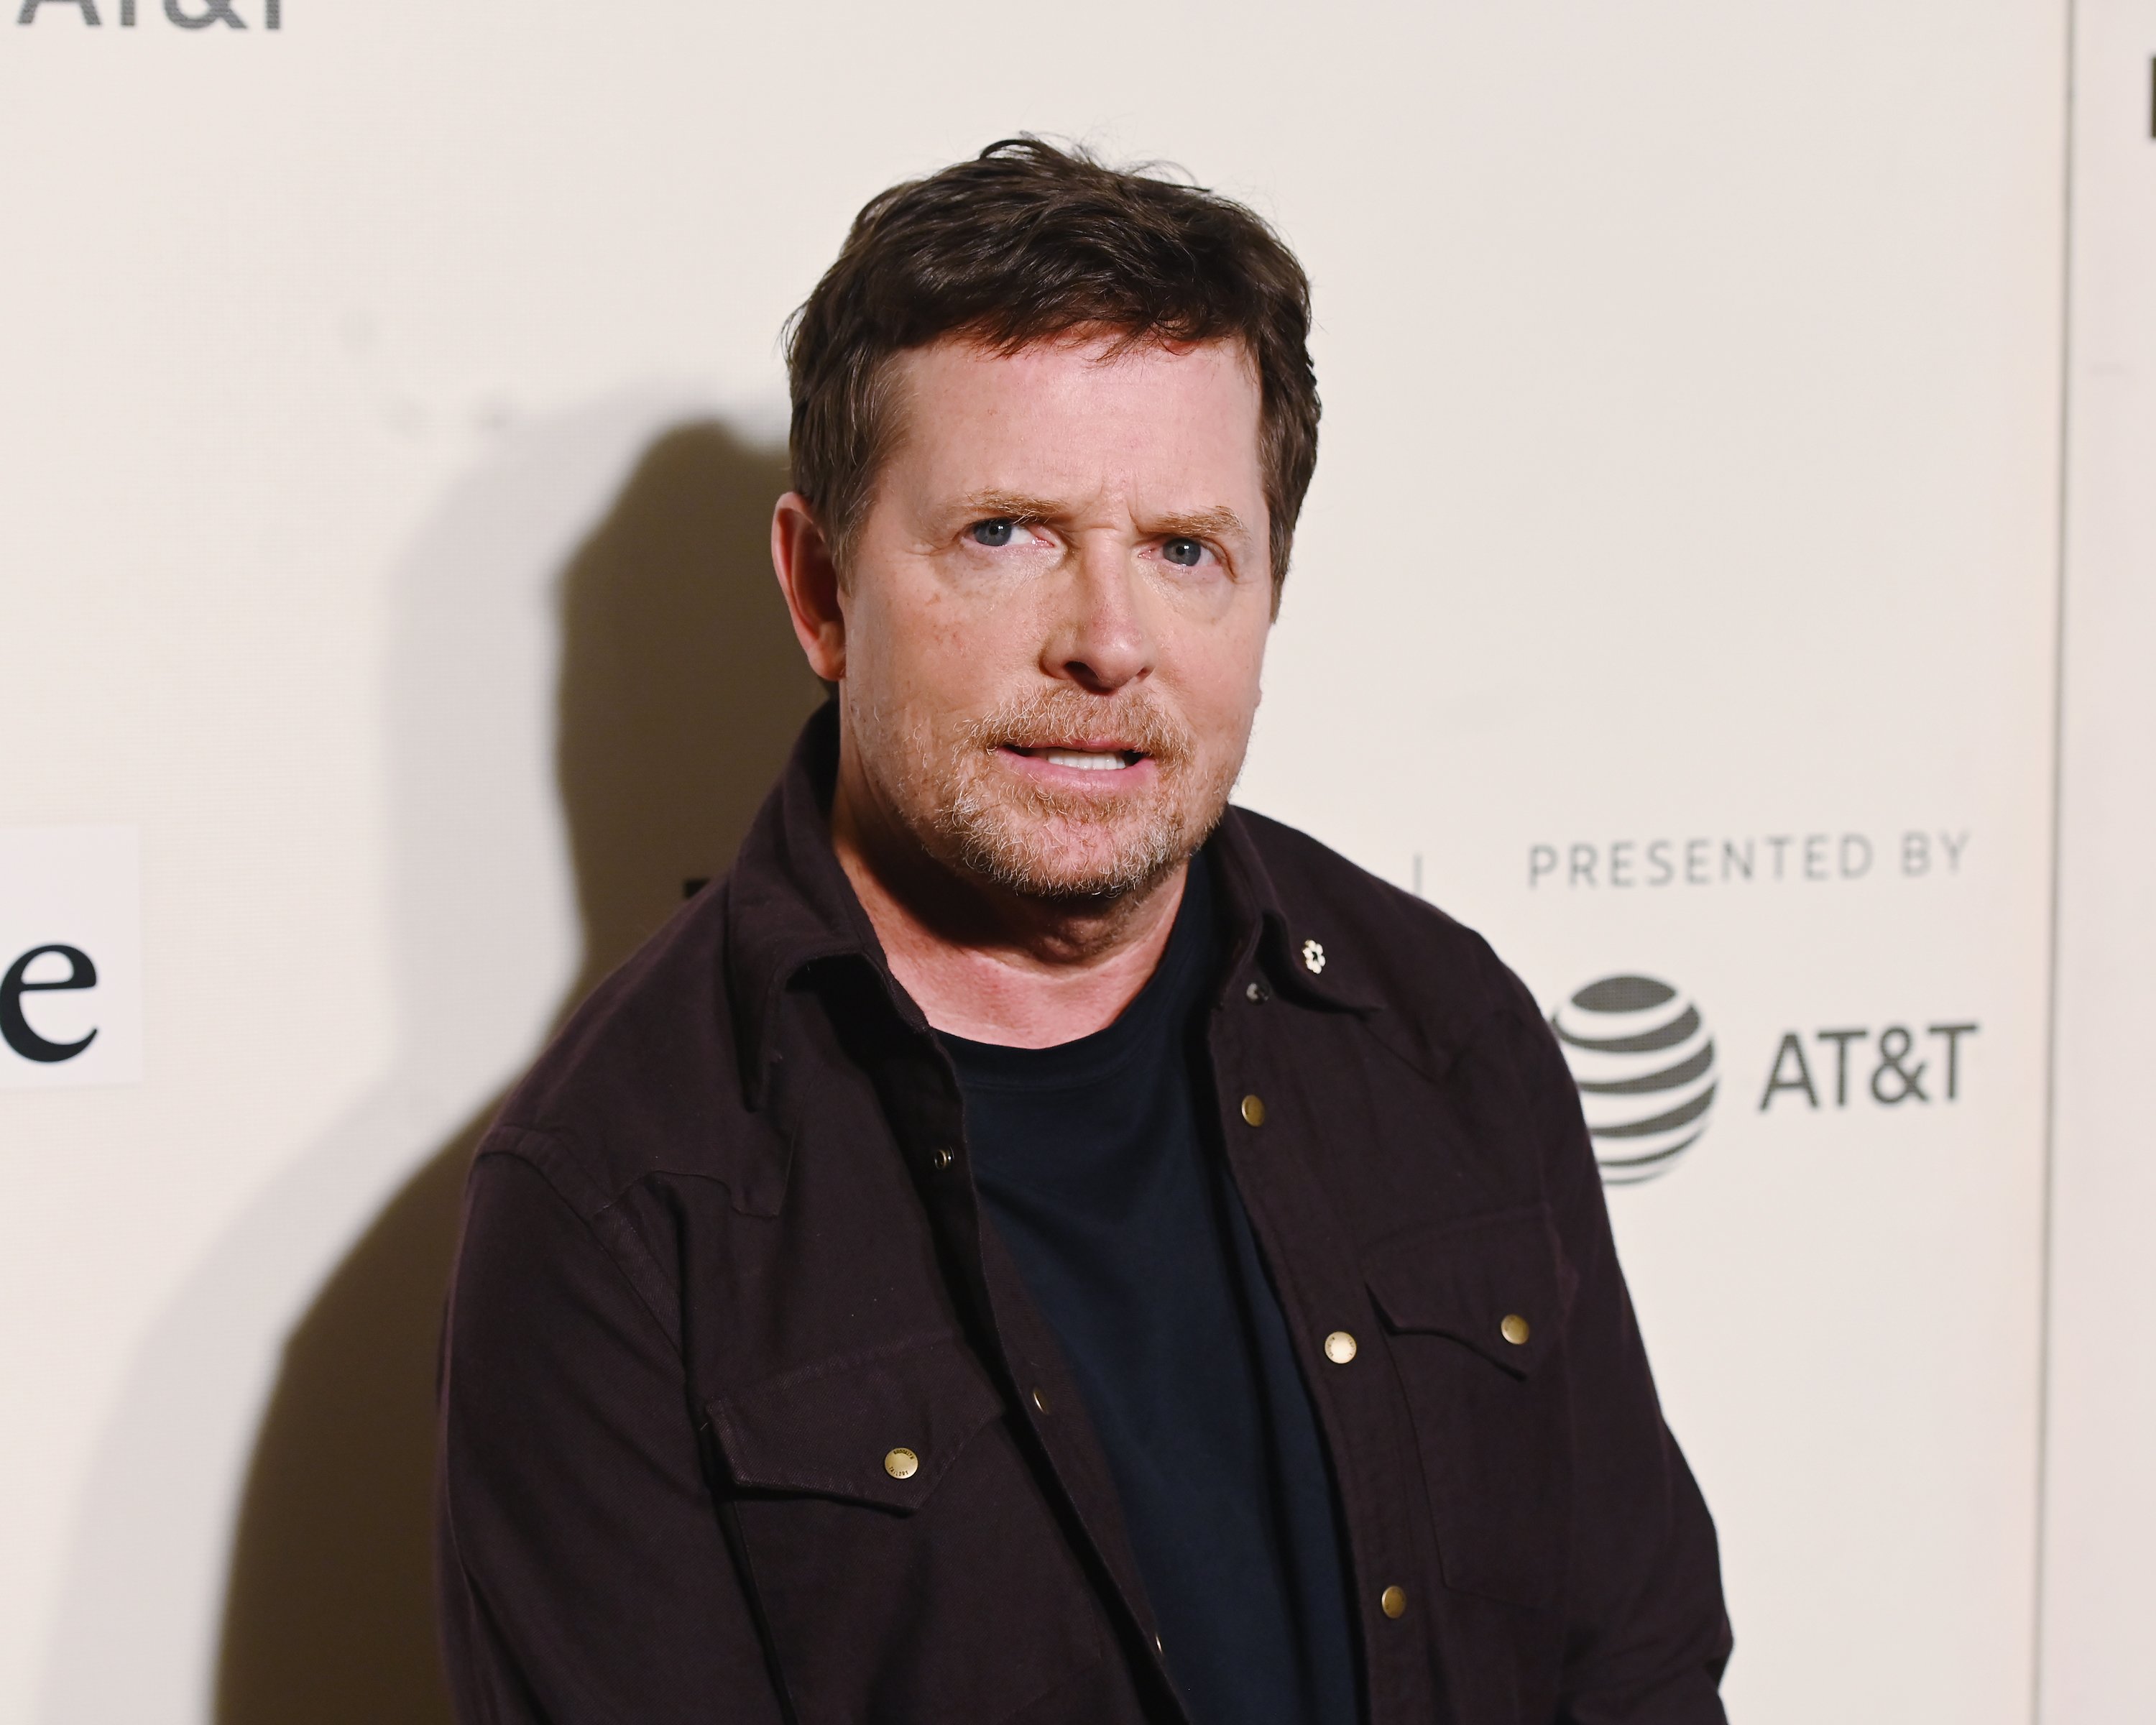 Michael J. Fox attends red carpet for the Tribeca Talks - Storytellers - 2019 Tribeca Film Festival at BMCC Tribeca PAC on April 30, 2019. | Source: Getty Images